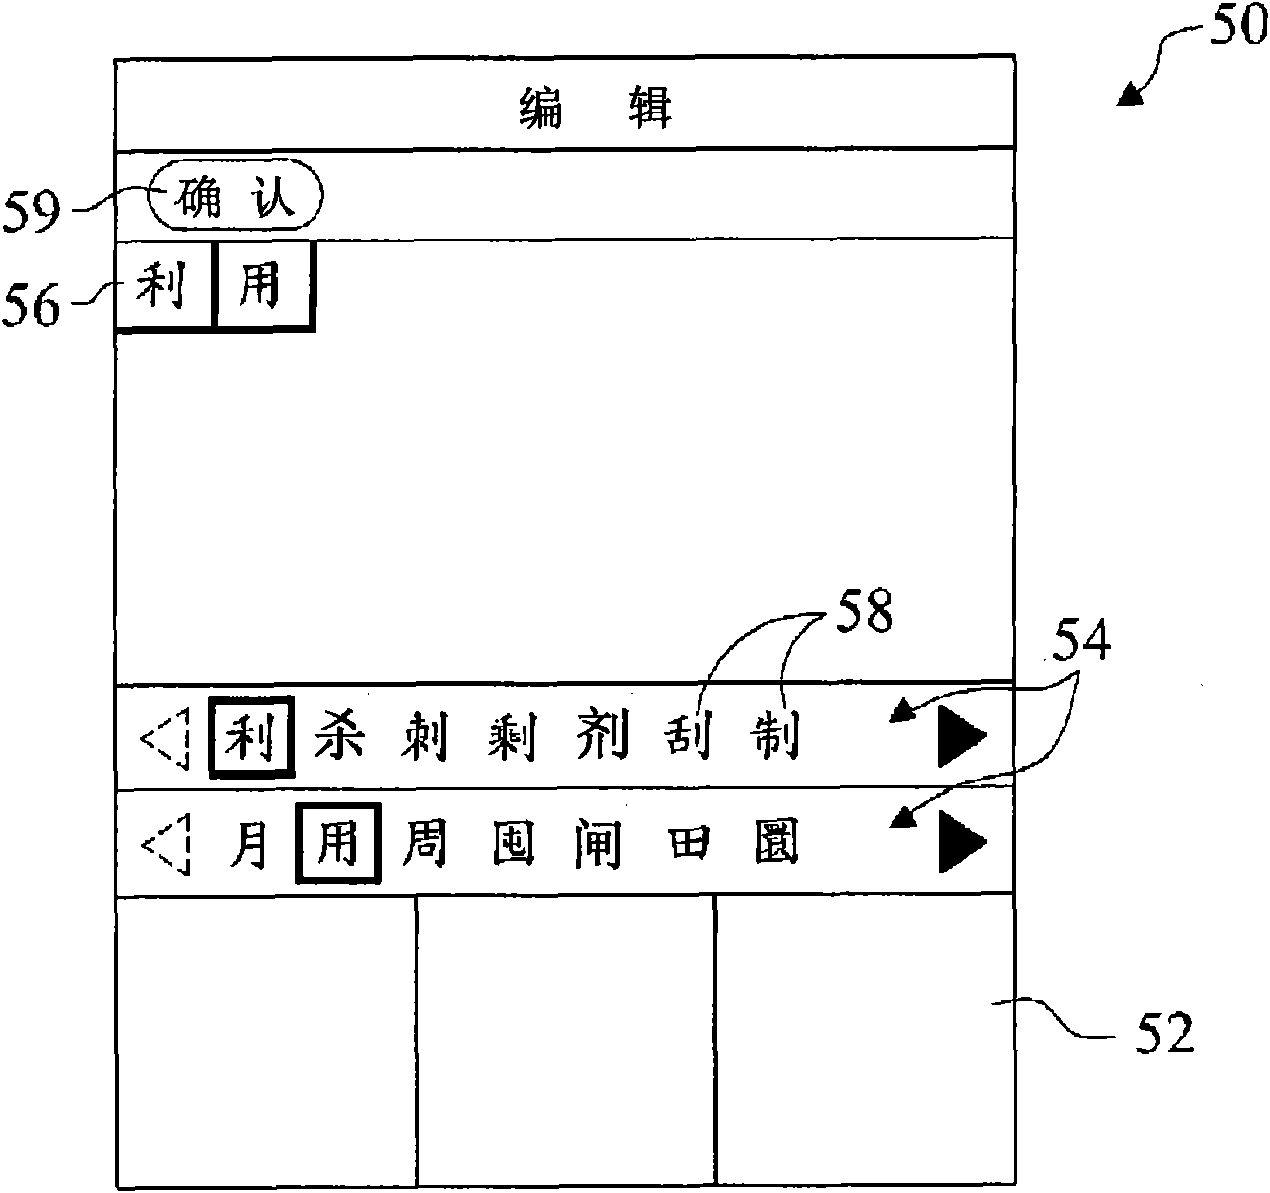 Man-machine input system and input method for text editing